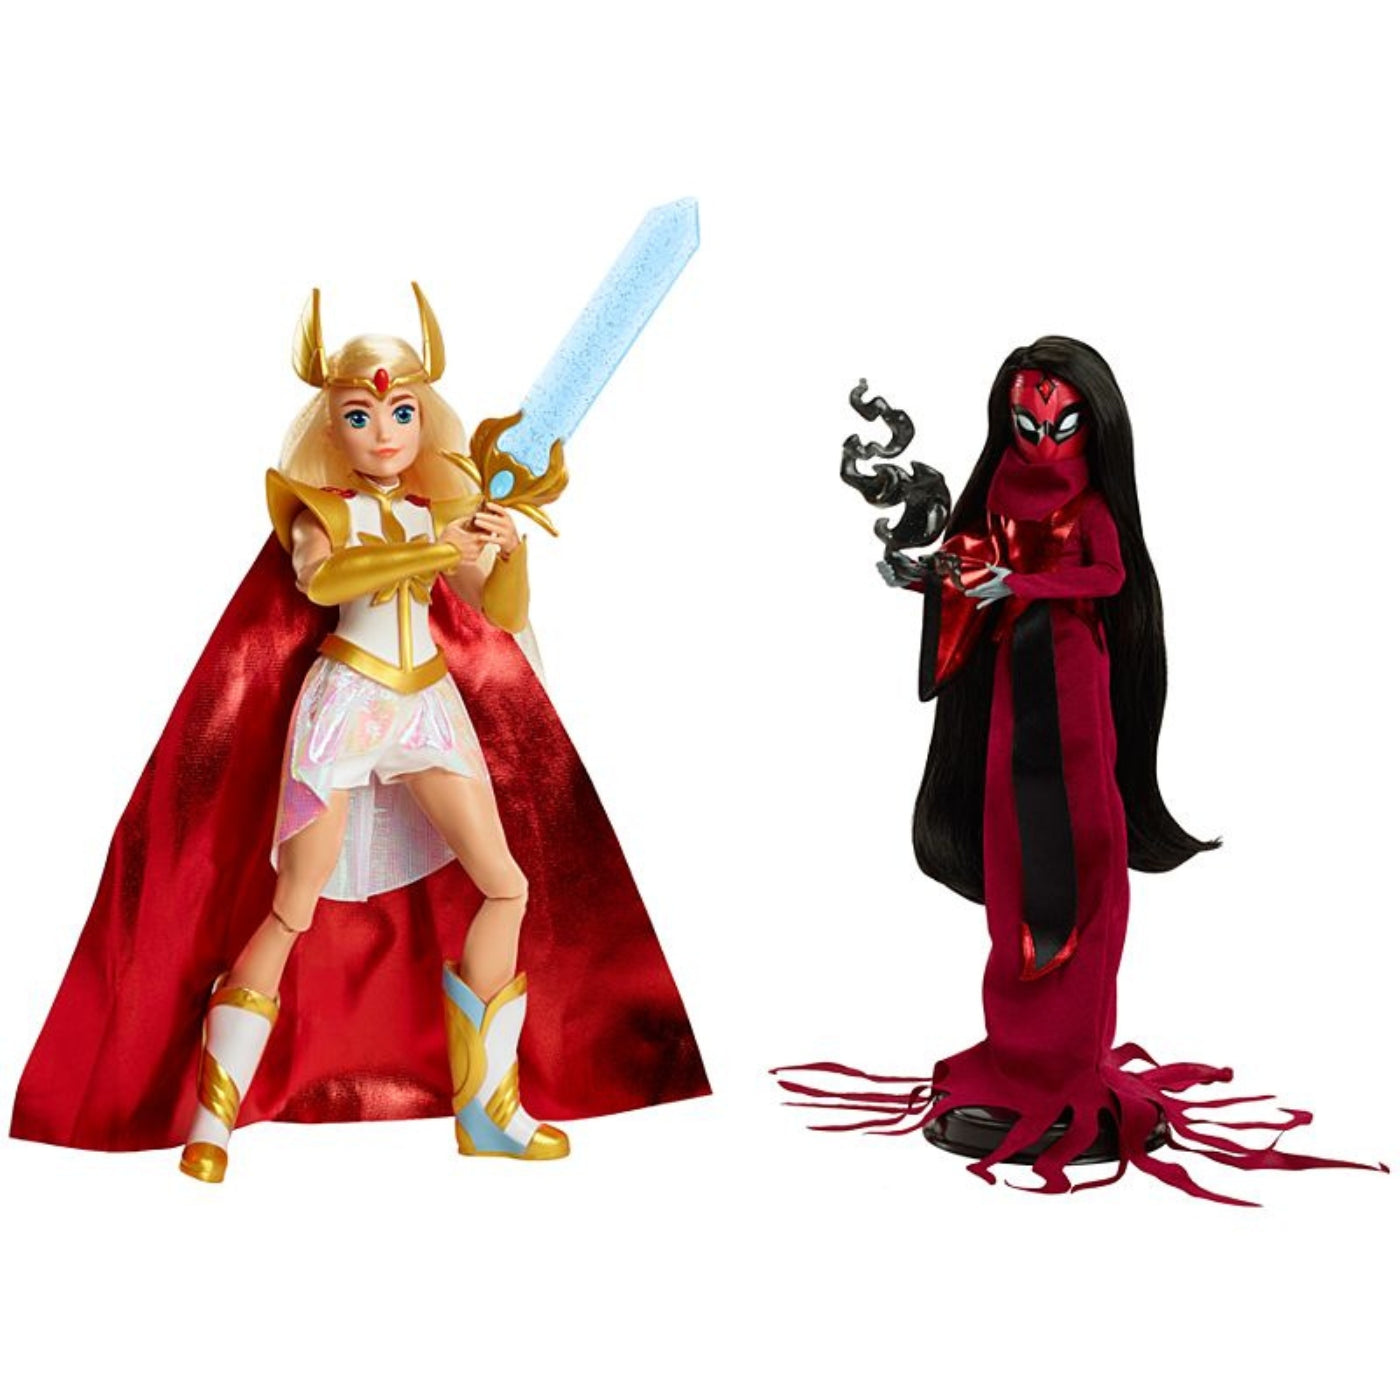 Shera and the princess of the power